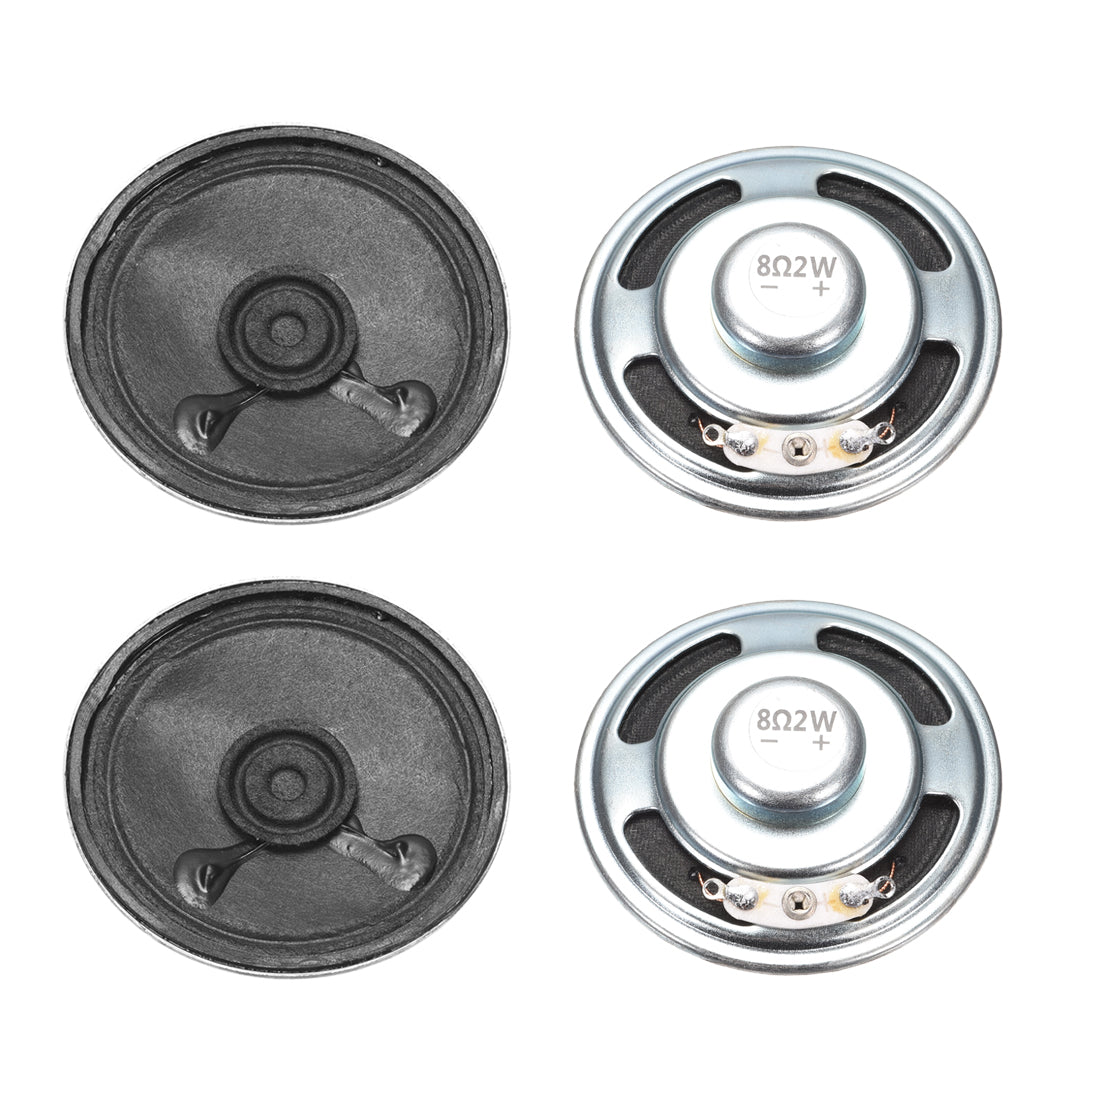 uxcell Uxcell 2W 8 Ohm DIY Magnetic Speaker 50mm Round Shape Replacement Loudspeaker for  4pcs